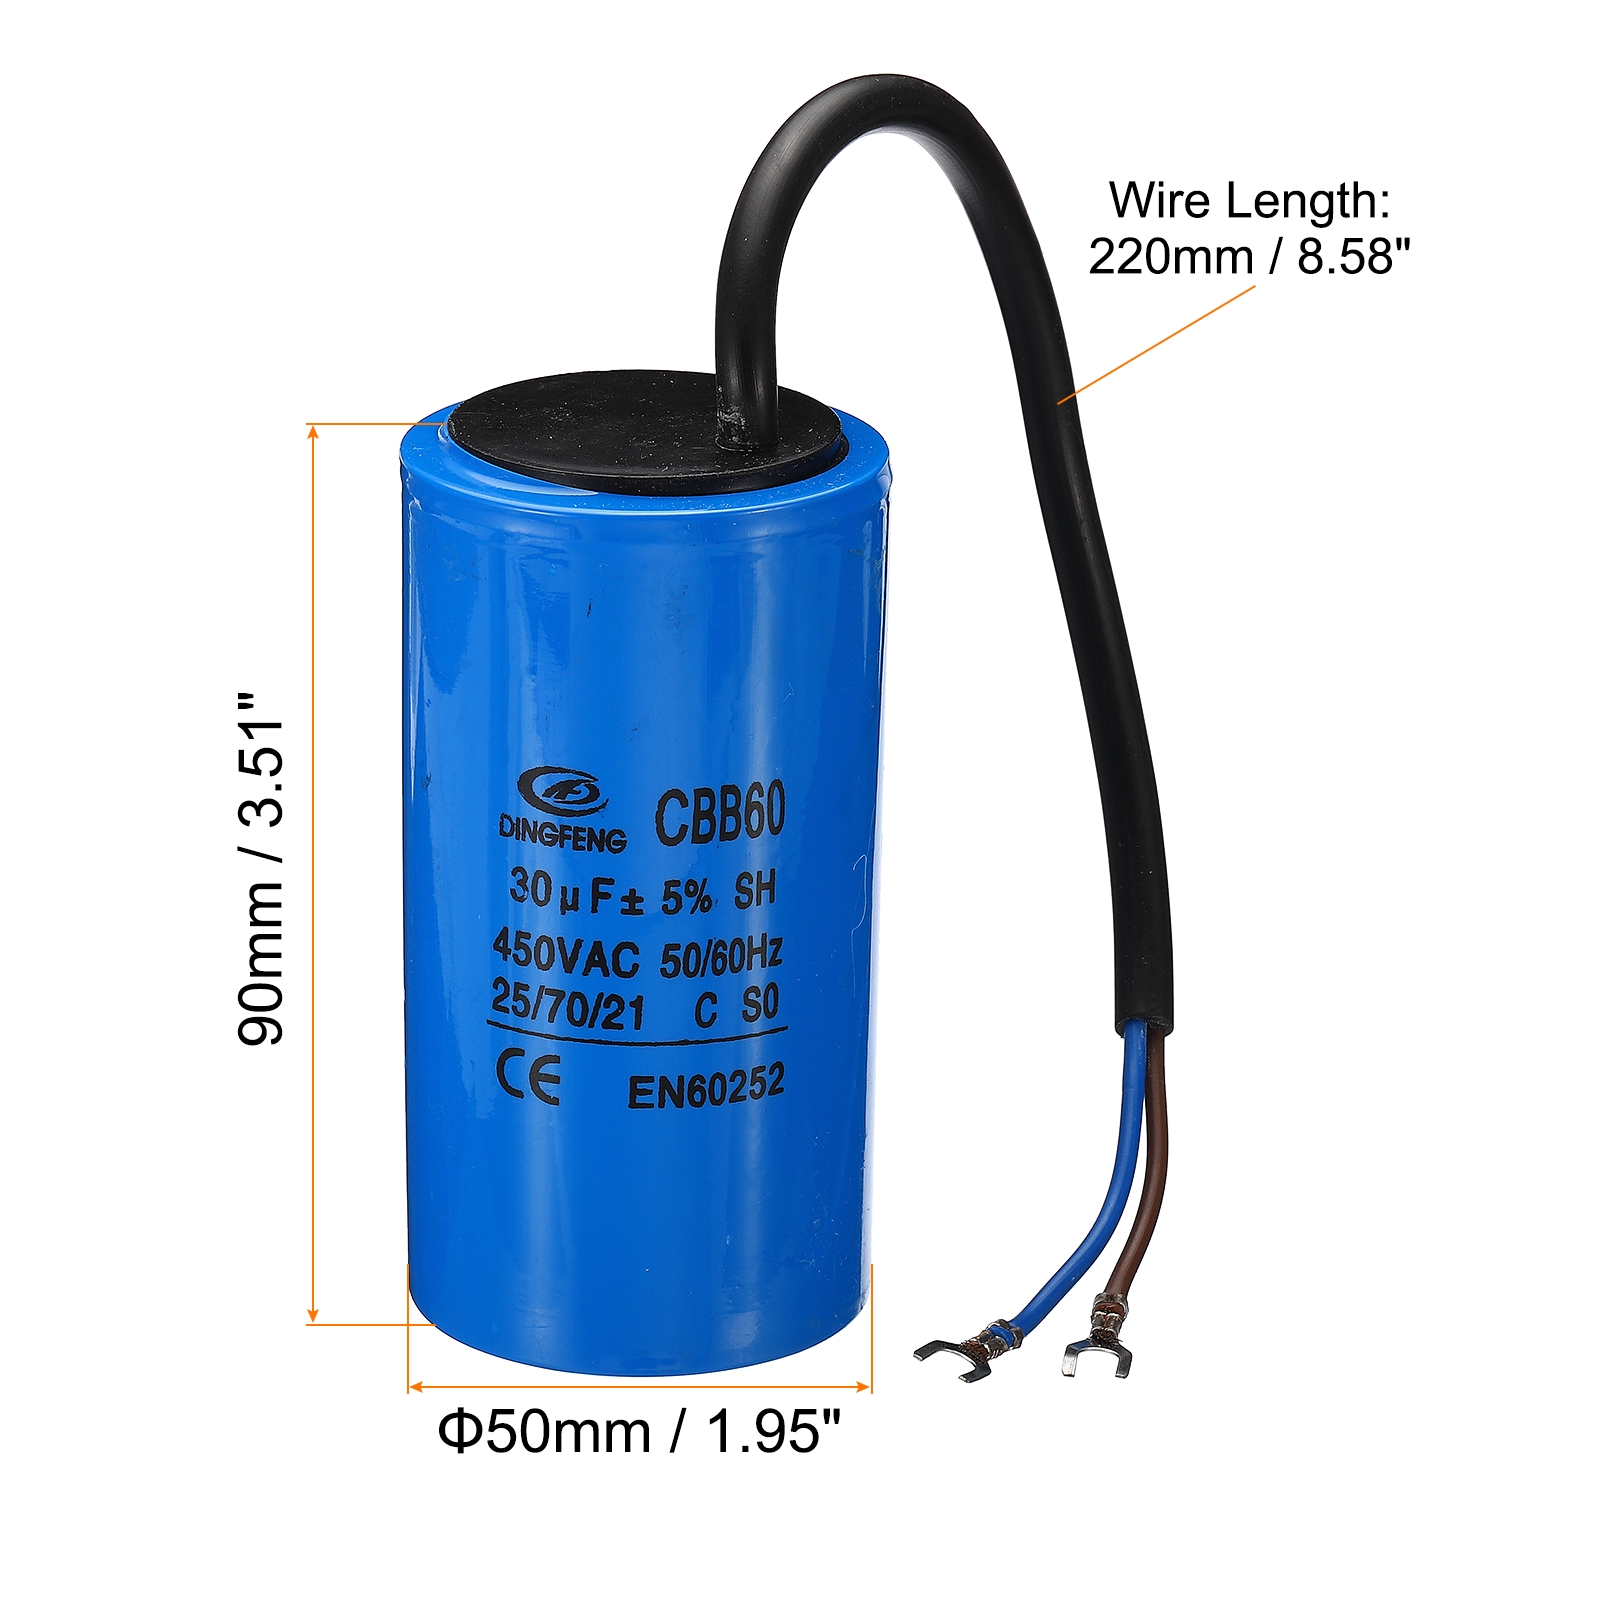 CBB60 30uF Running Capacitor, 3pcs AC 450V 2 Wires 50/60Hz Cylinder 90x50mm for Motor Start - image 2 of 5